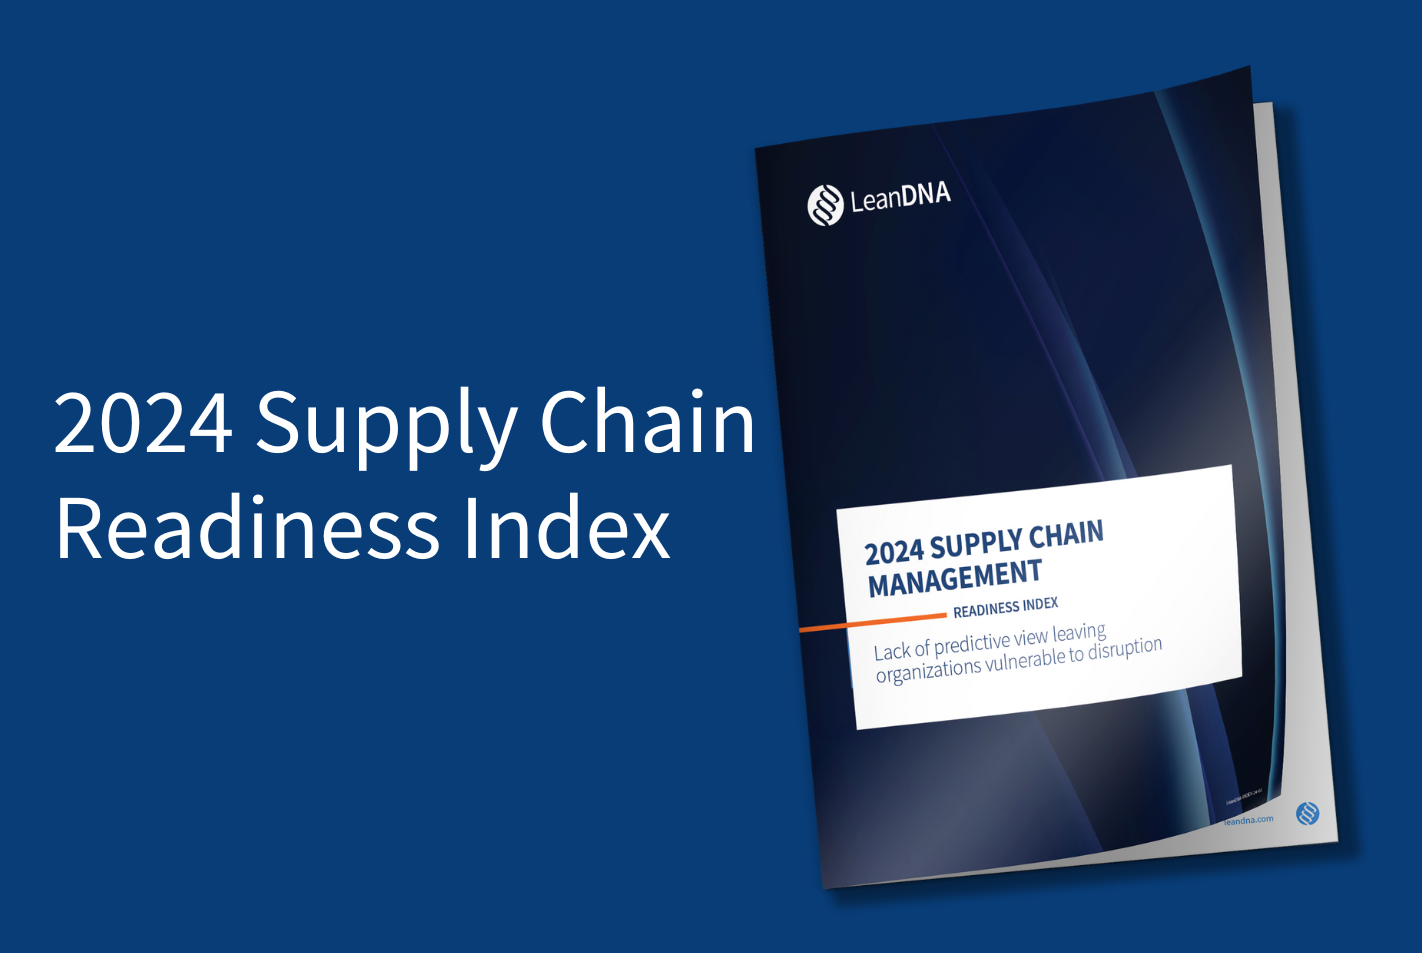 2024 SCM Report: Global turbulence and lack of readiness threaten supply chain stability